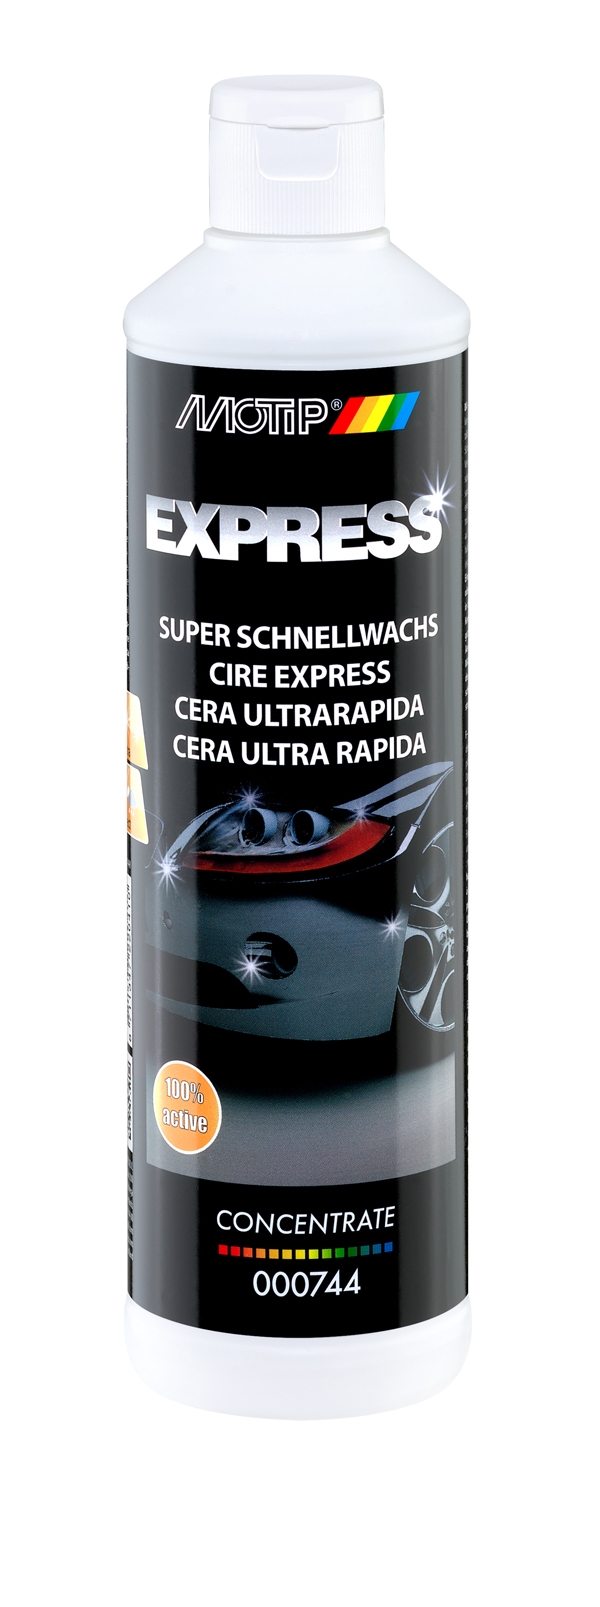 CIRE EXPRESS Shampoing Lustrant Toutes Carrosseries - 500 ml- MOTIP 744